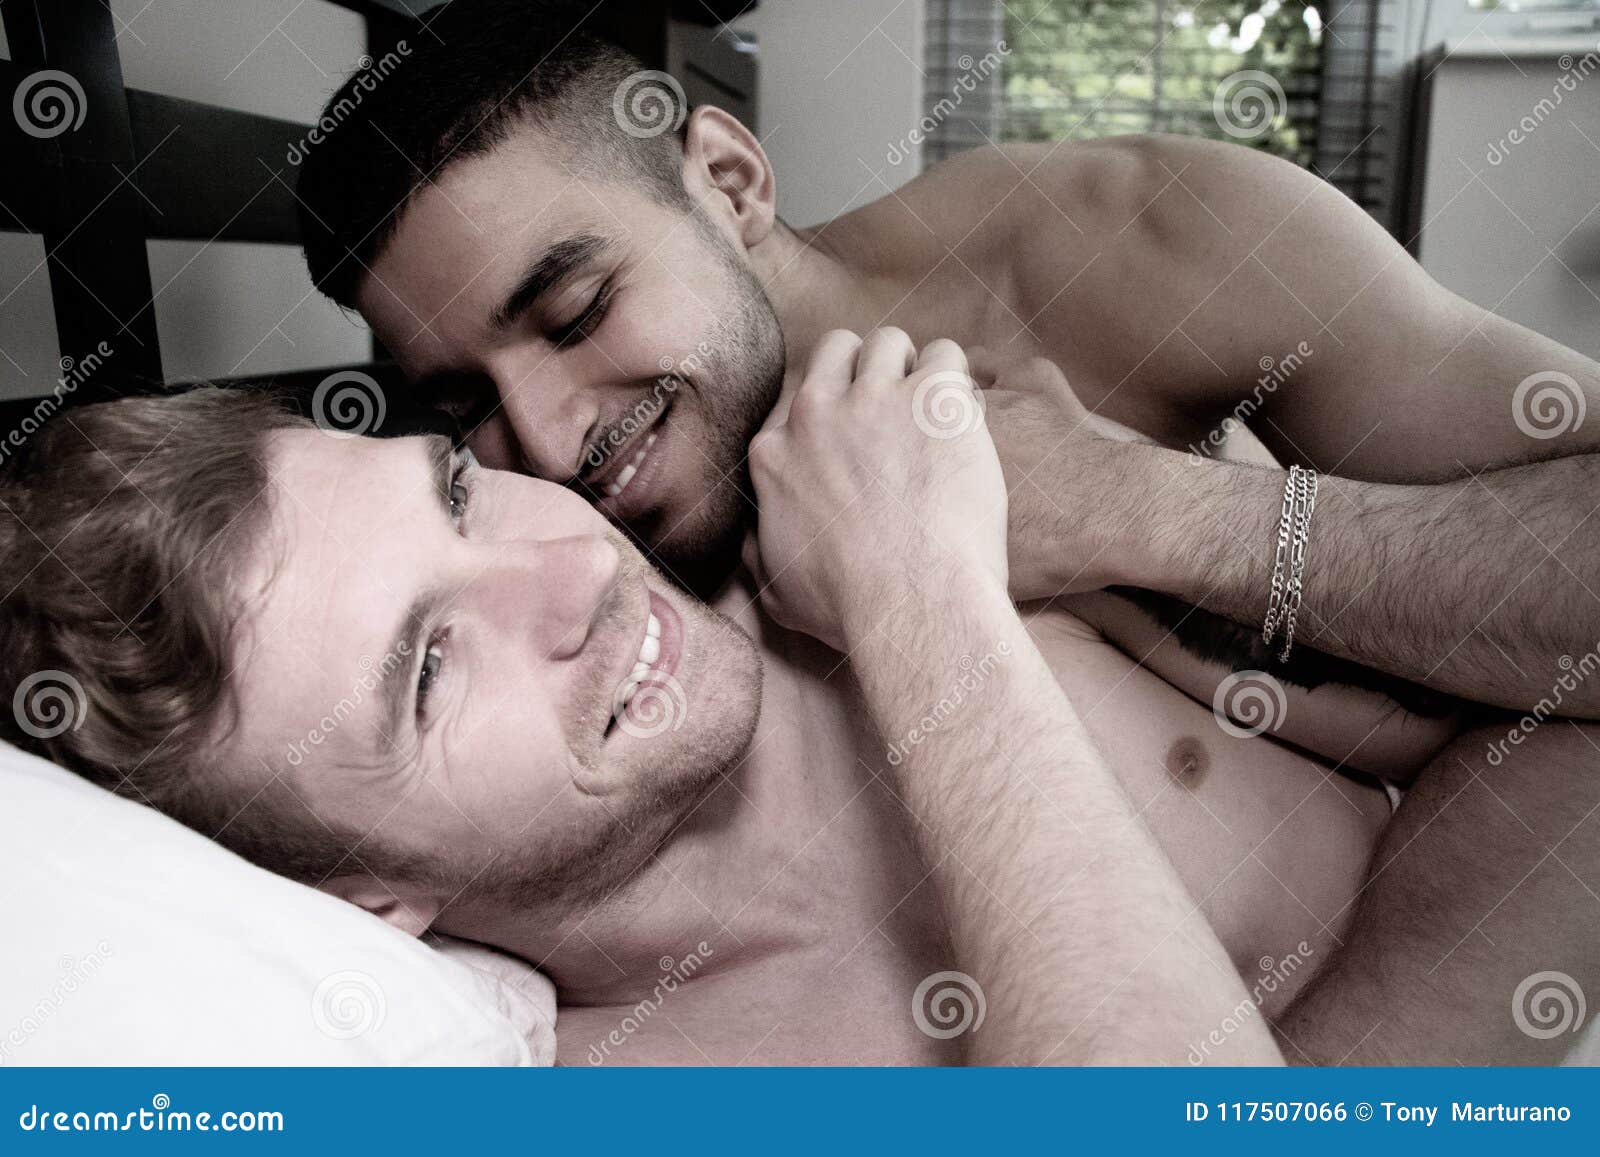 Naked, Gay Lovers, Husbands in Bed, Tickling and Laughing Stock Photo -  Image of lifestyle, eastern: 117507066